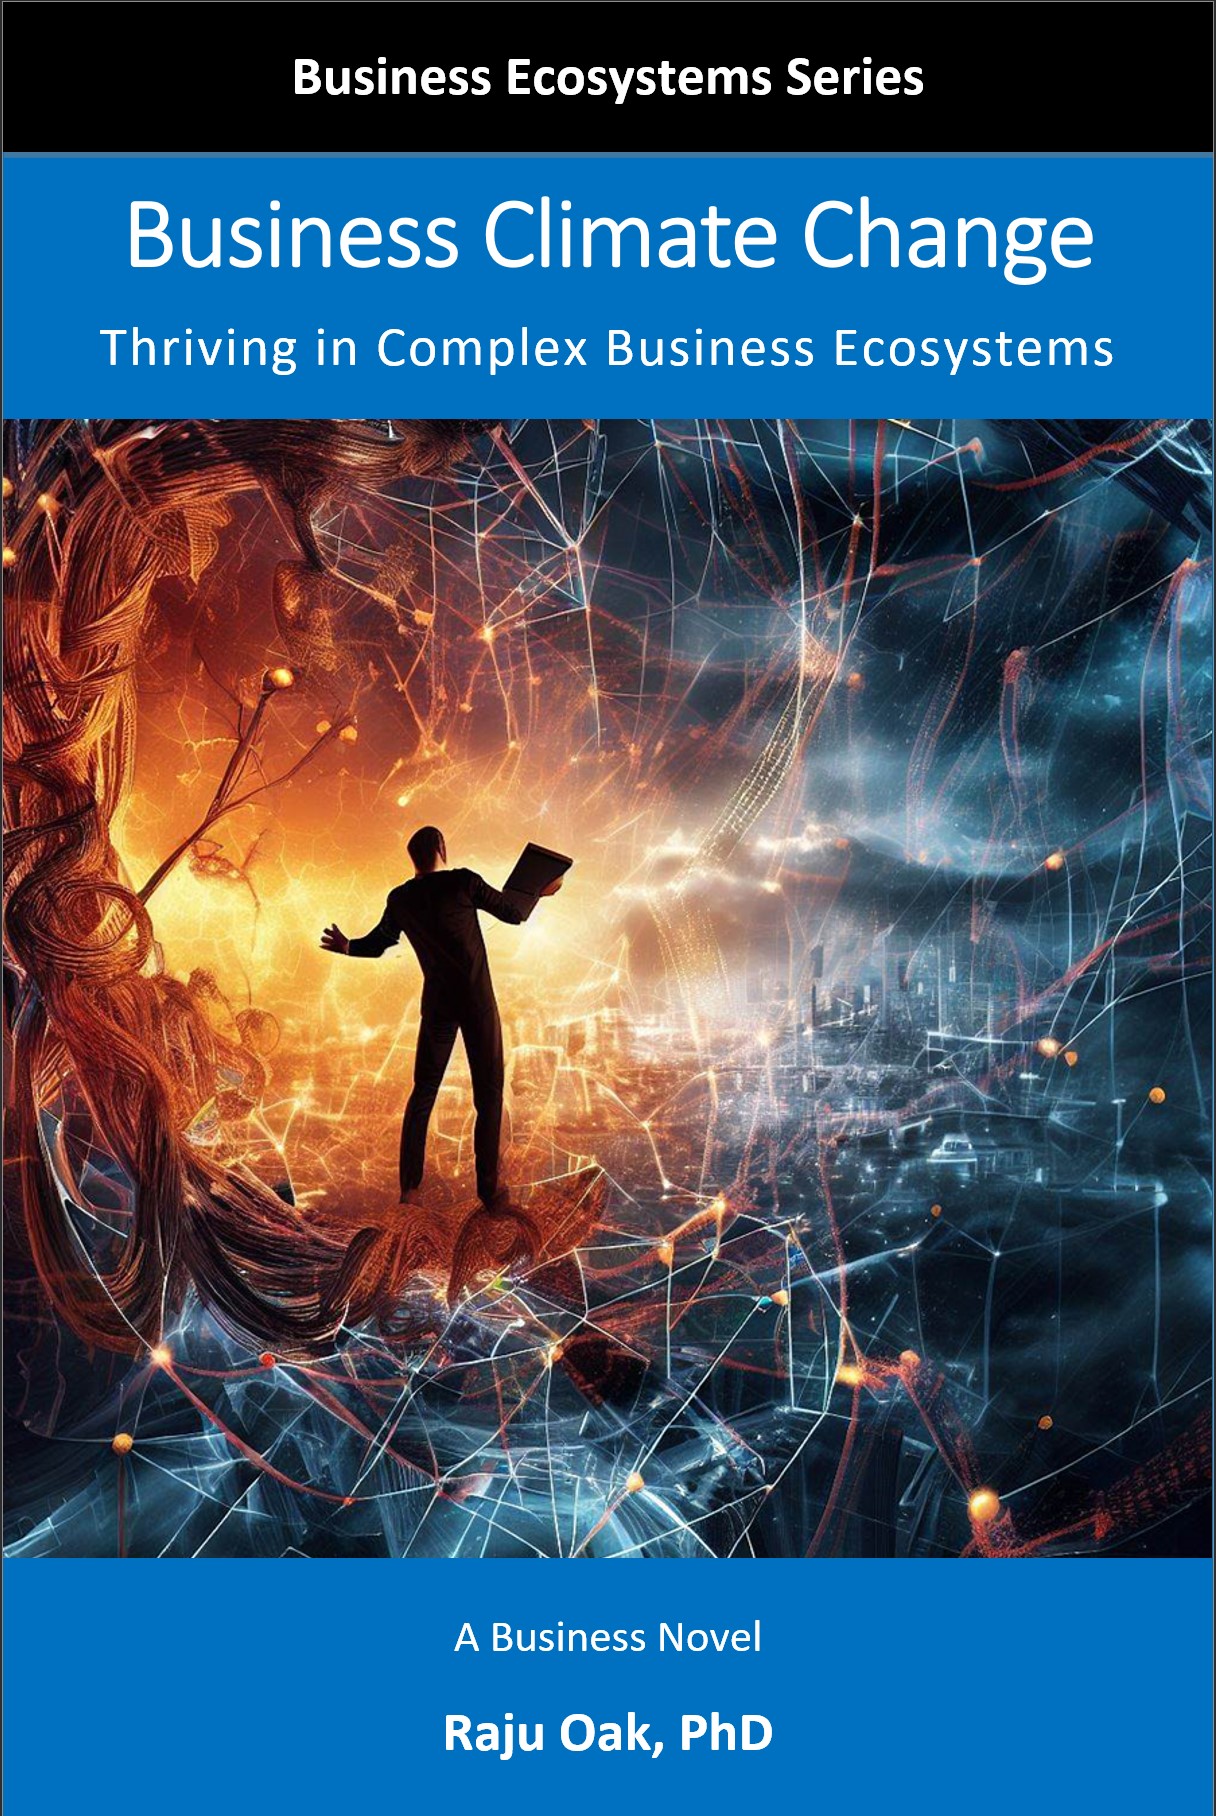 Book Cover - Business Climate Change